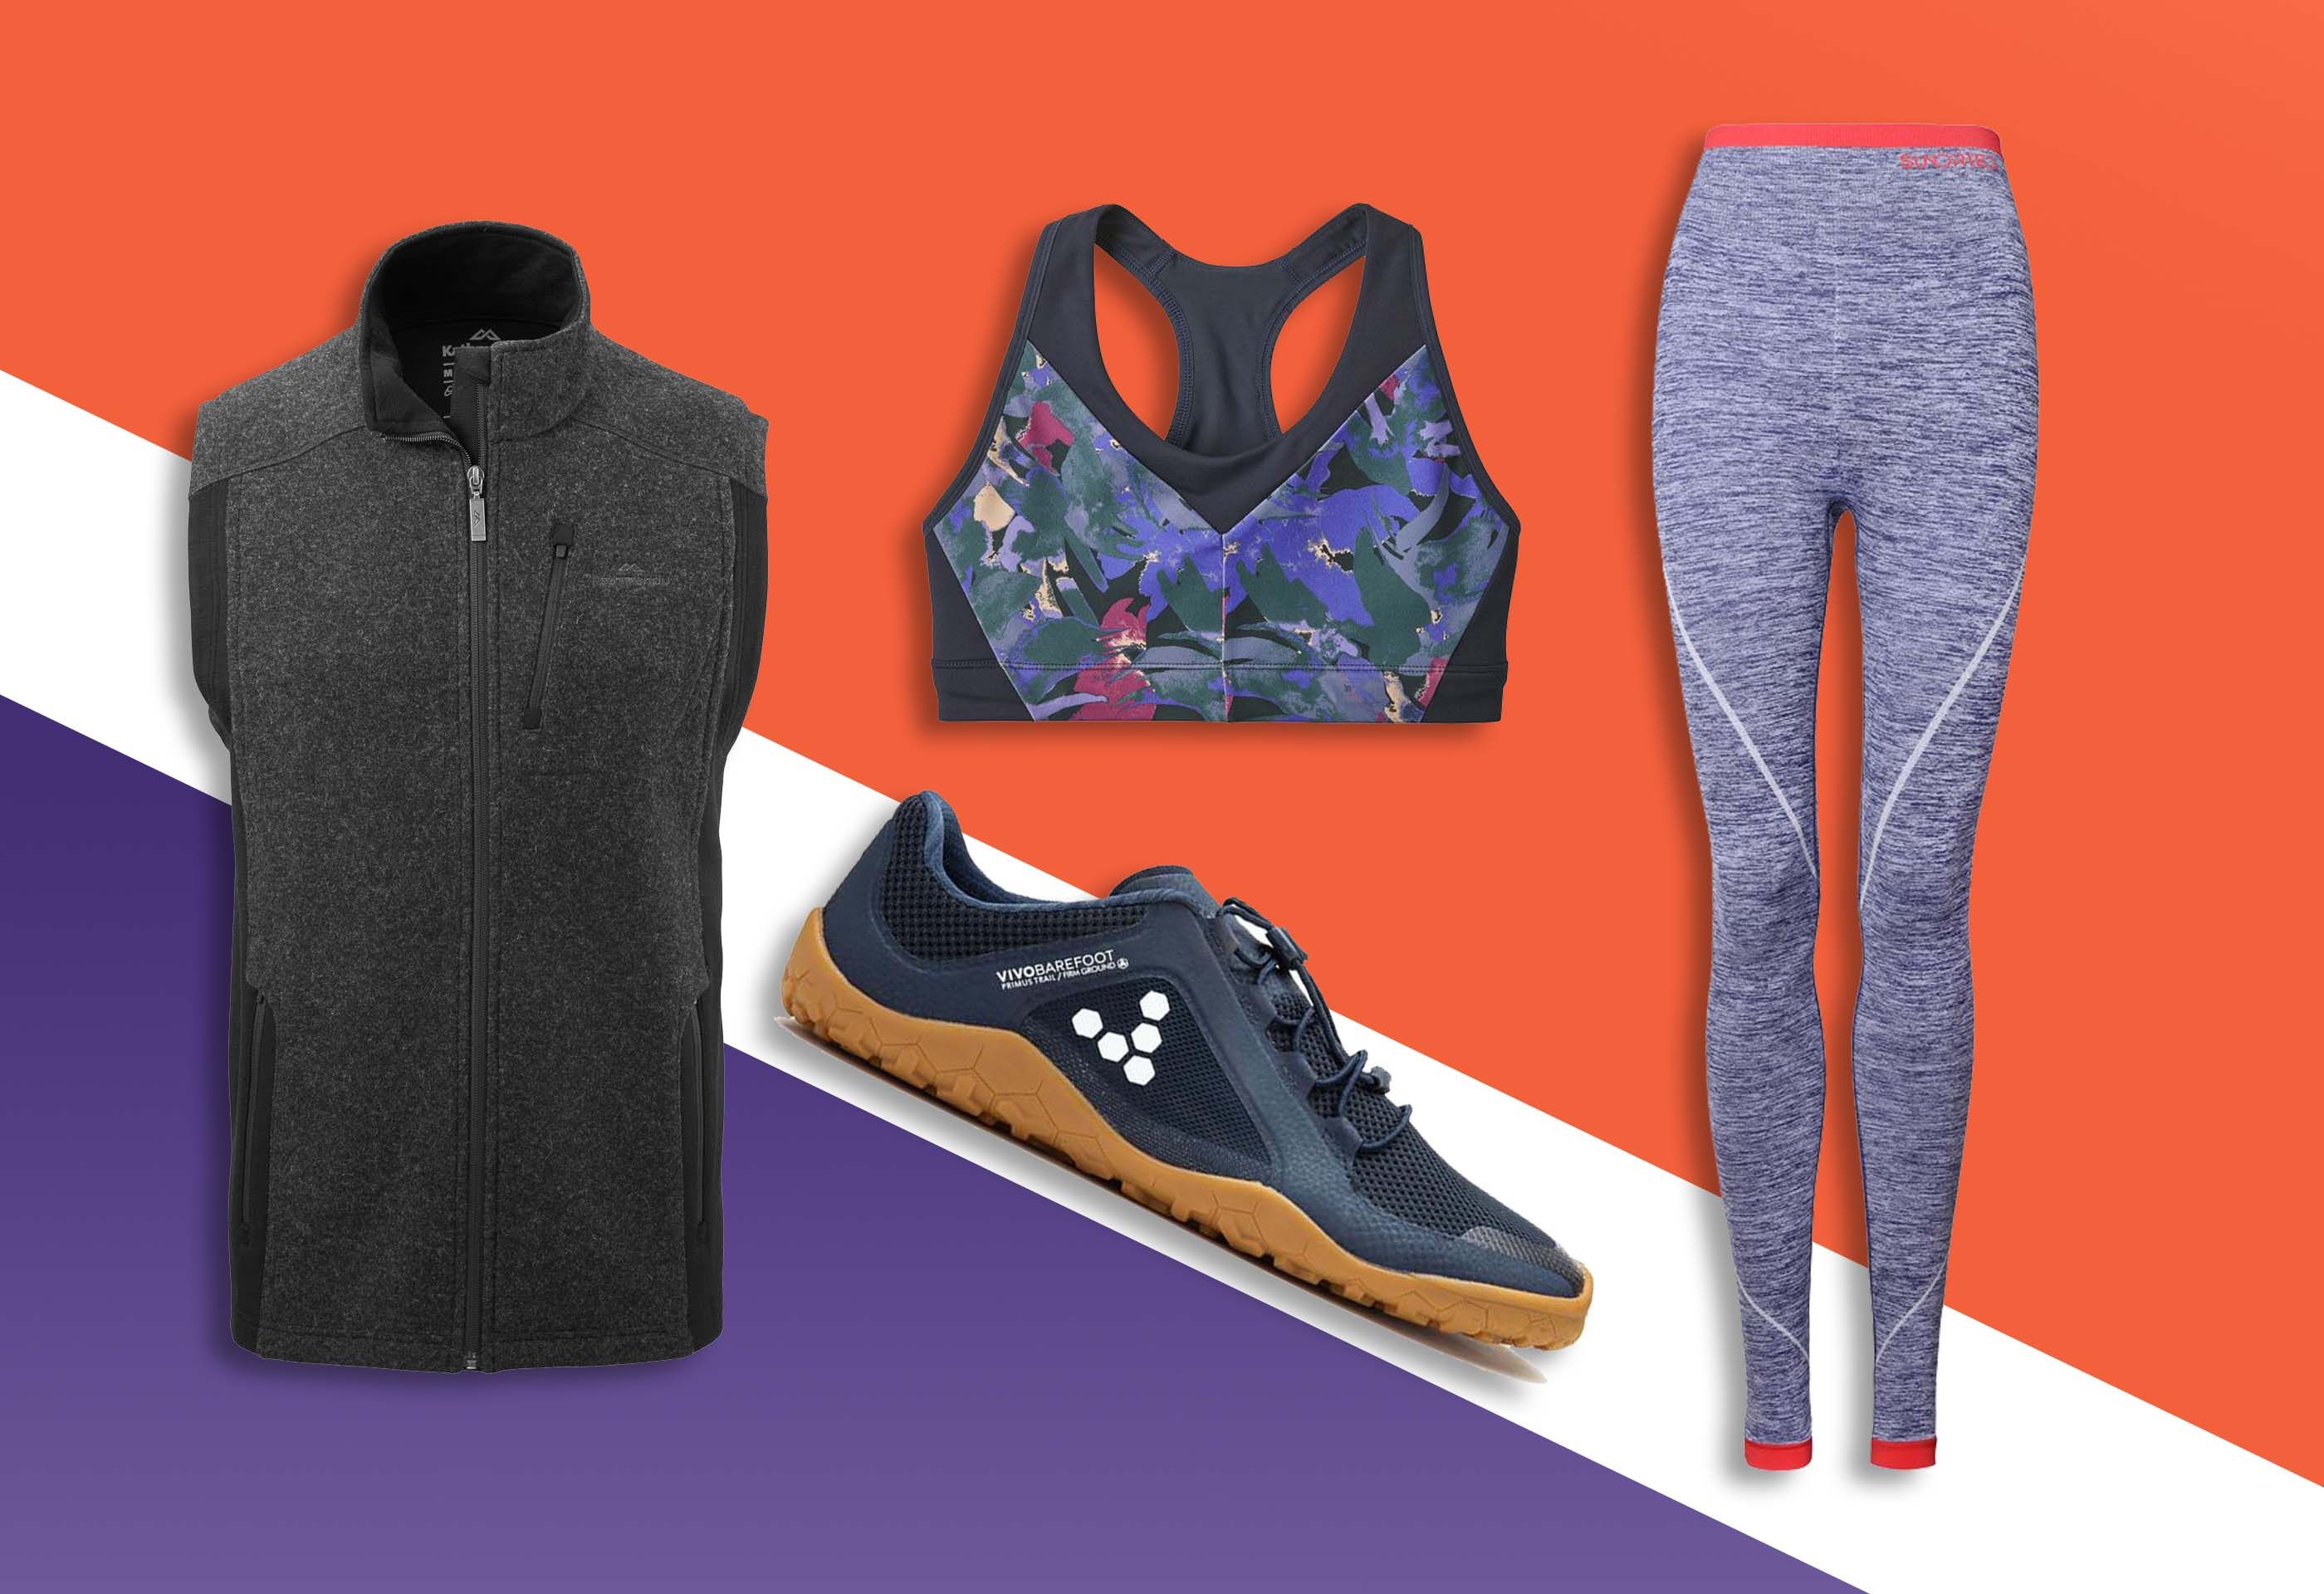 The Best Sustainable Running Gear